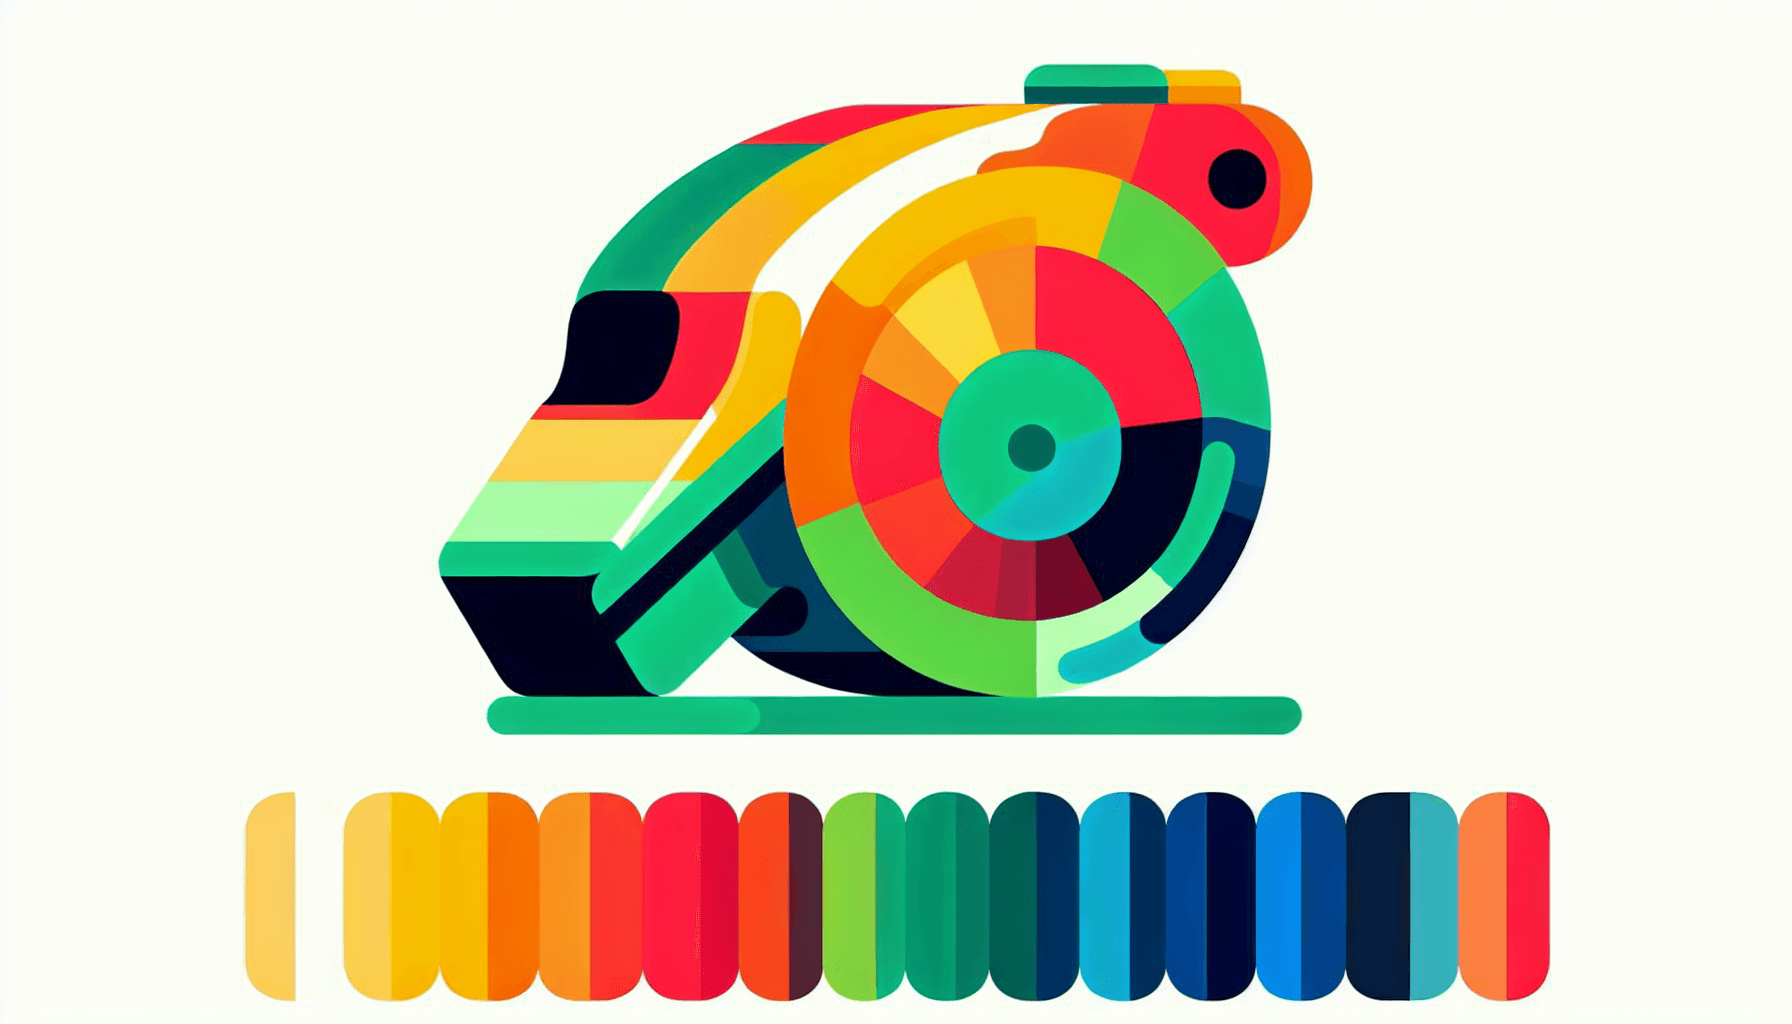 Whistle in flat illustration style and white background, red #f47574, green #88c7a8, yellow #fcc44b, and blue #645bc8 colors.